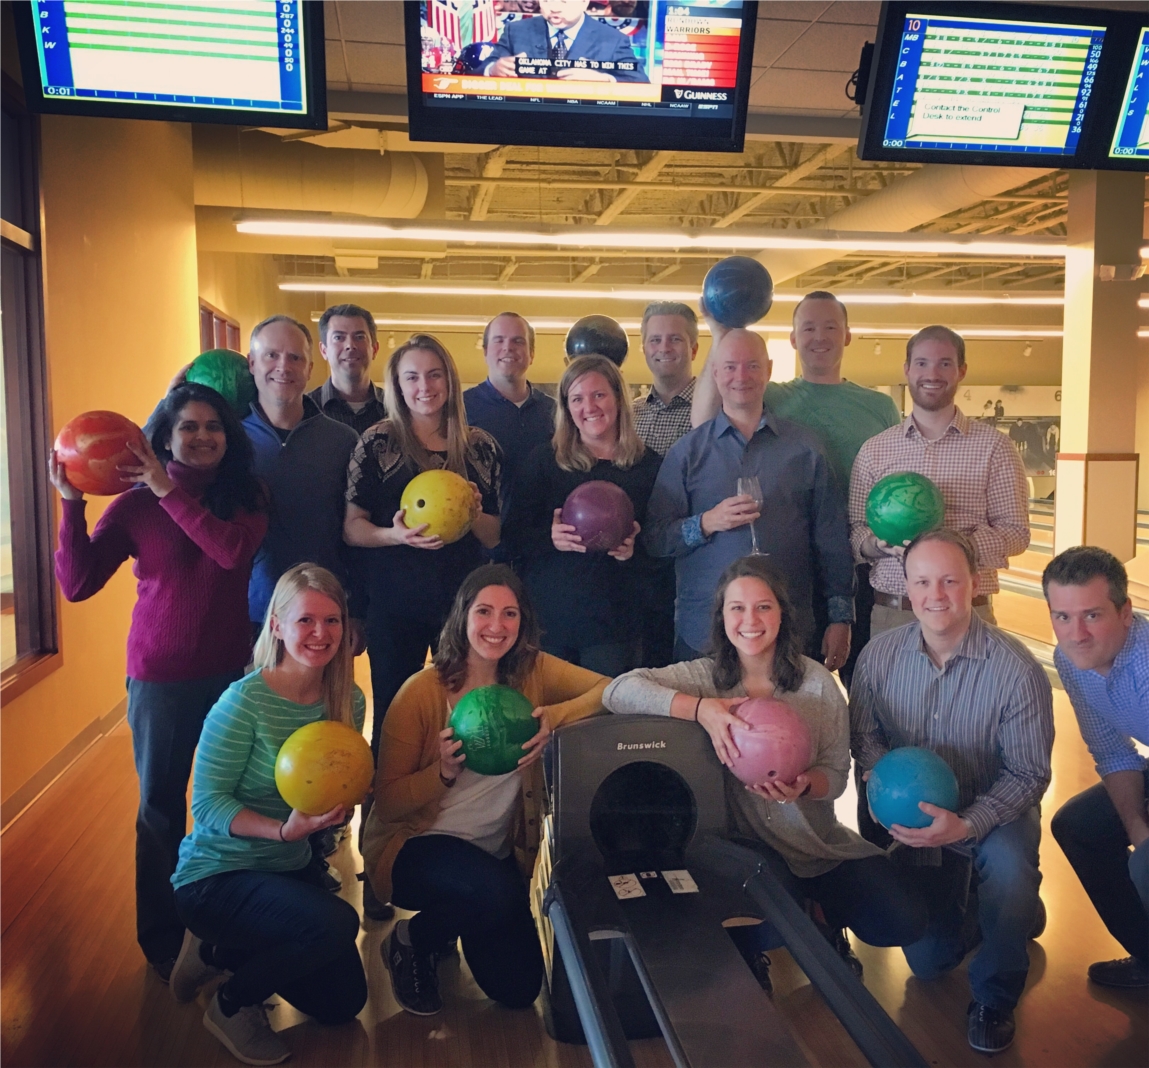 In February, our CEO Mark Johnson emailed the whole company saying, "Once every four years we get an extra day in the year. We're going to make the most of this, with some normal work...but also with some team building and some fun." We spent the day at Pinstripes in Edina with an all company meeting, followed by some bowling, bocce ball and brews.